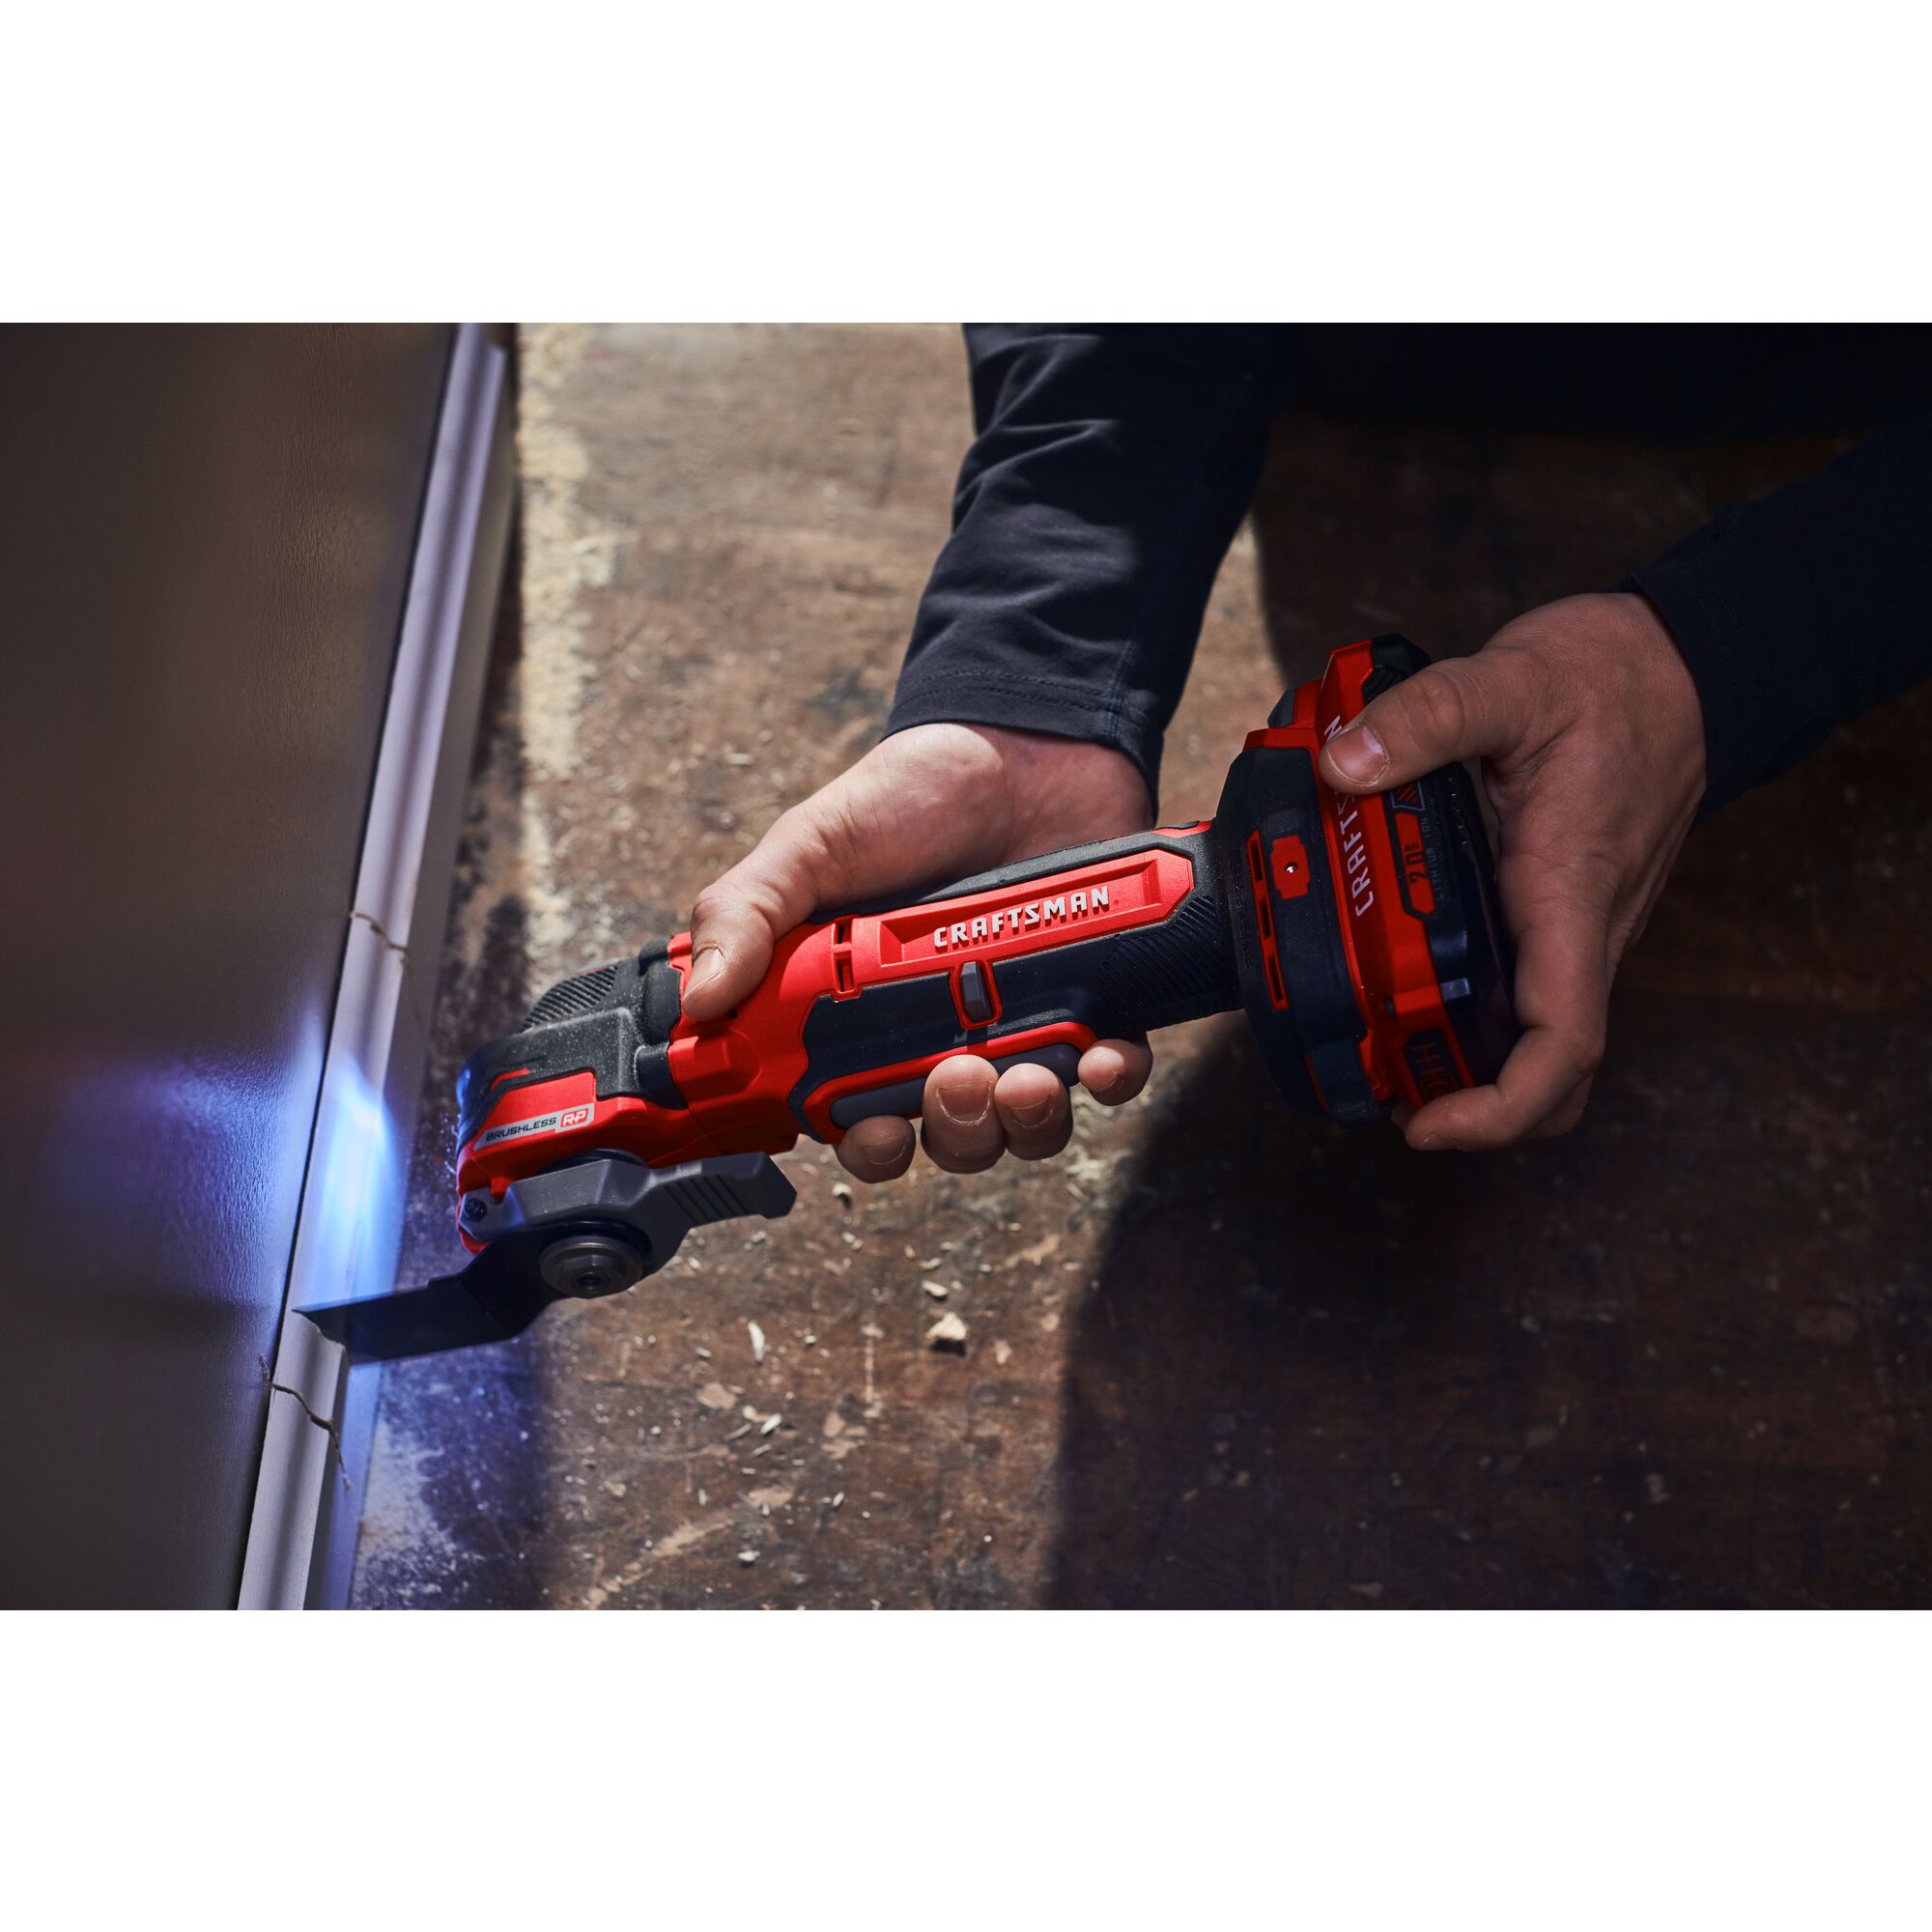 View of CRAFTSMAN Oscillating Multi-Tools being used by consumer